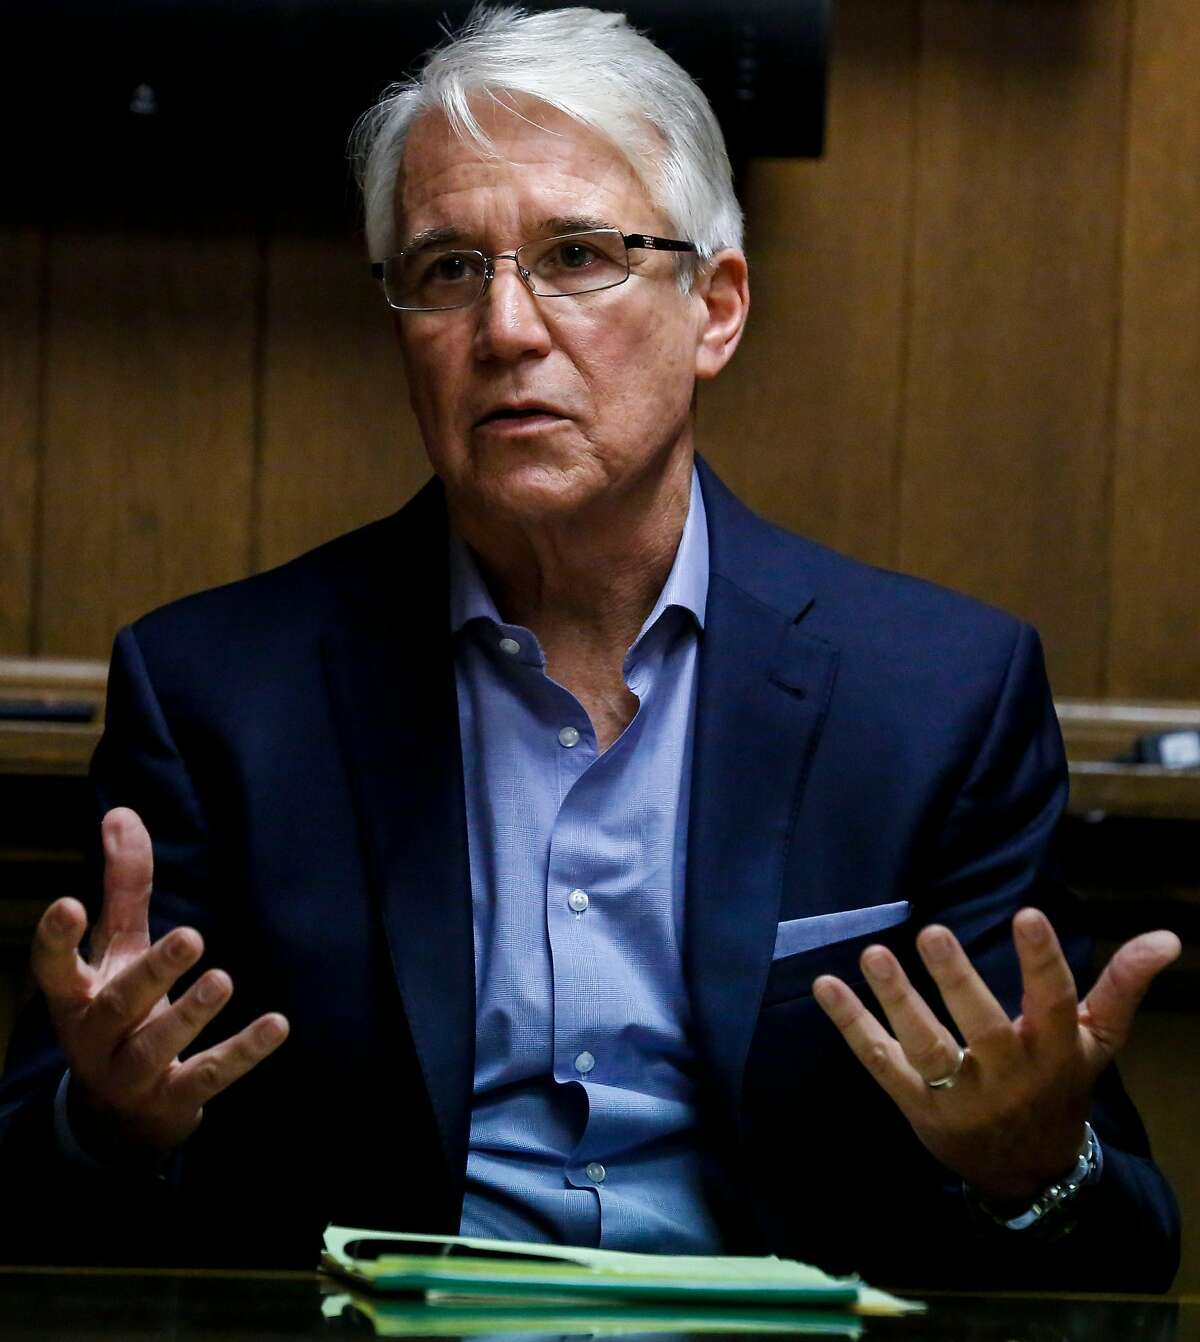 District Attorney George Gascon speaks to reporters during an editorial board meeting at the San Francisco Chronicle board room Wednesday, July 10, 2019, in San Francisco, Calif.